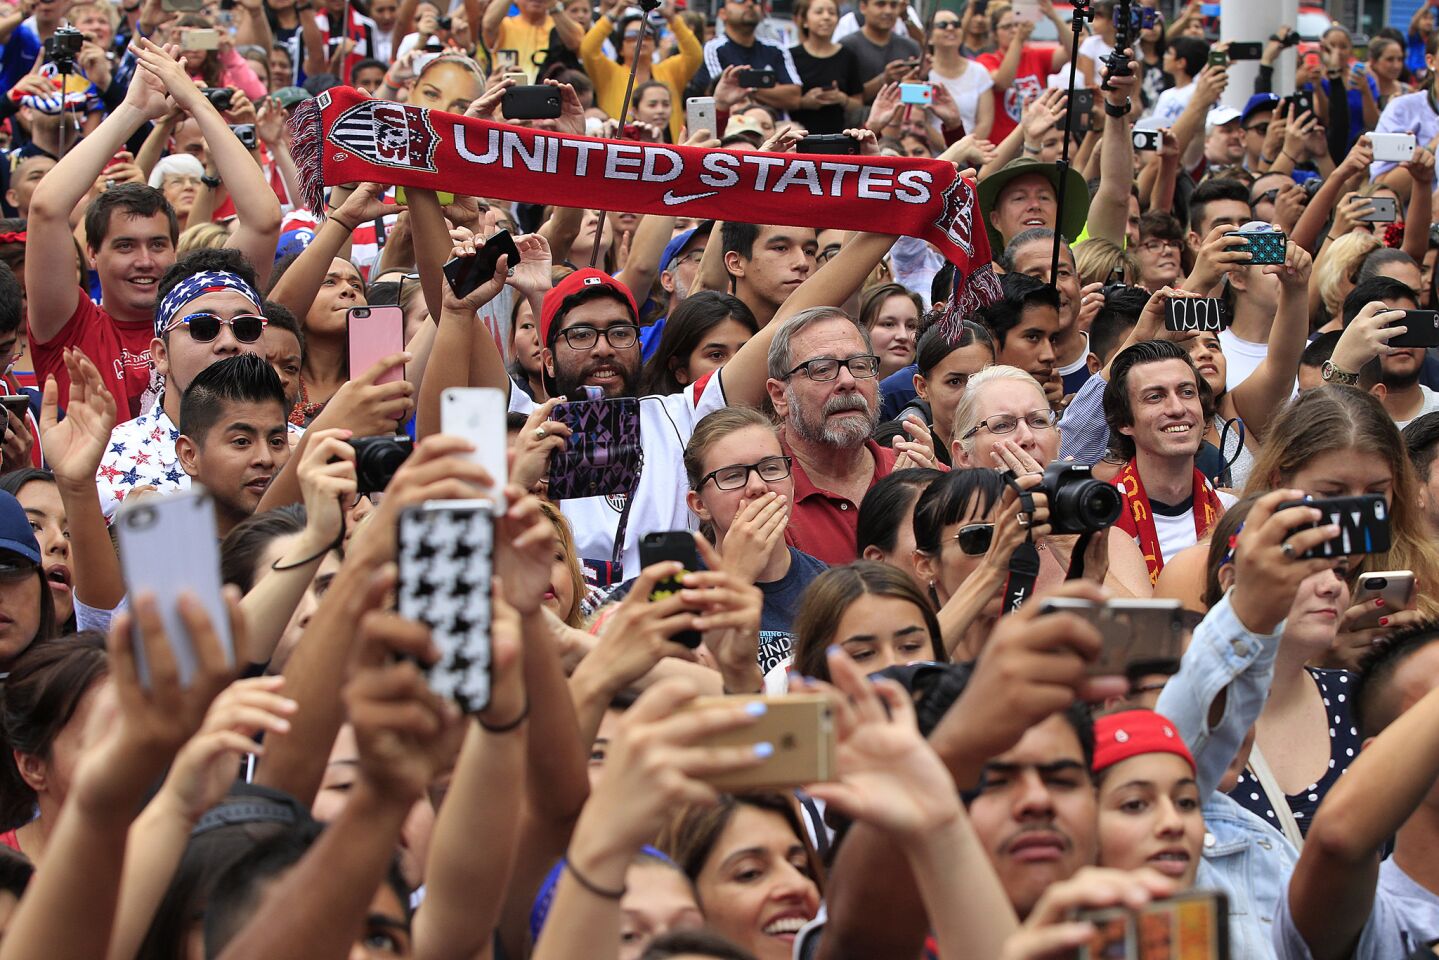 Thousands of fans cheer the U.S. team members.